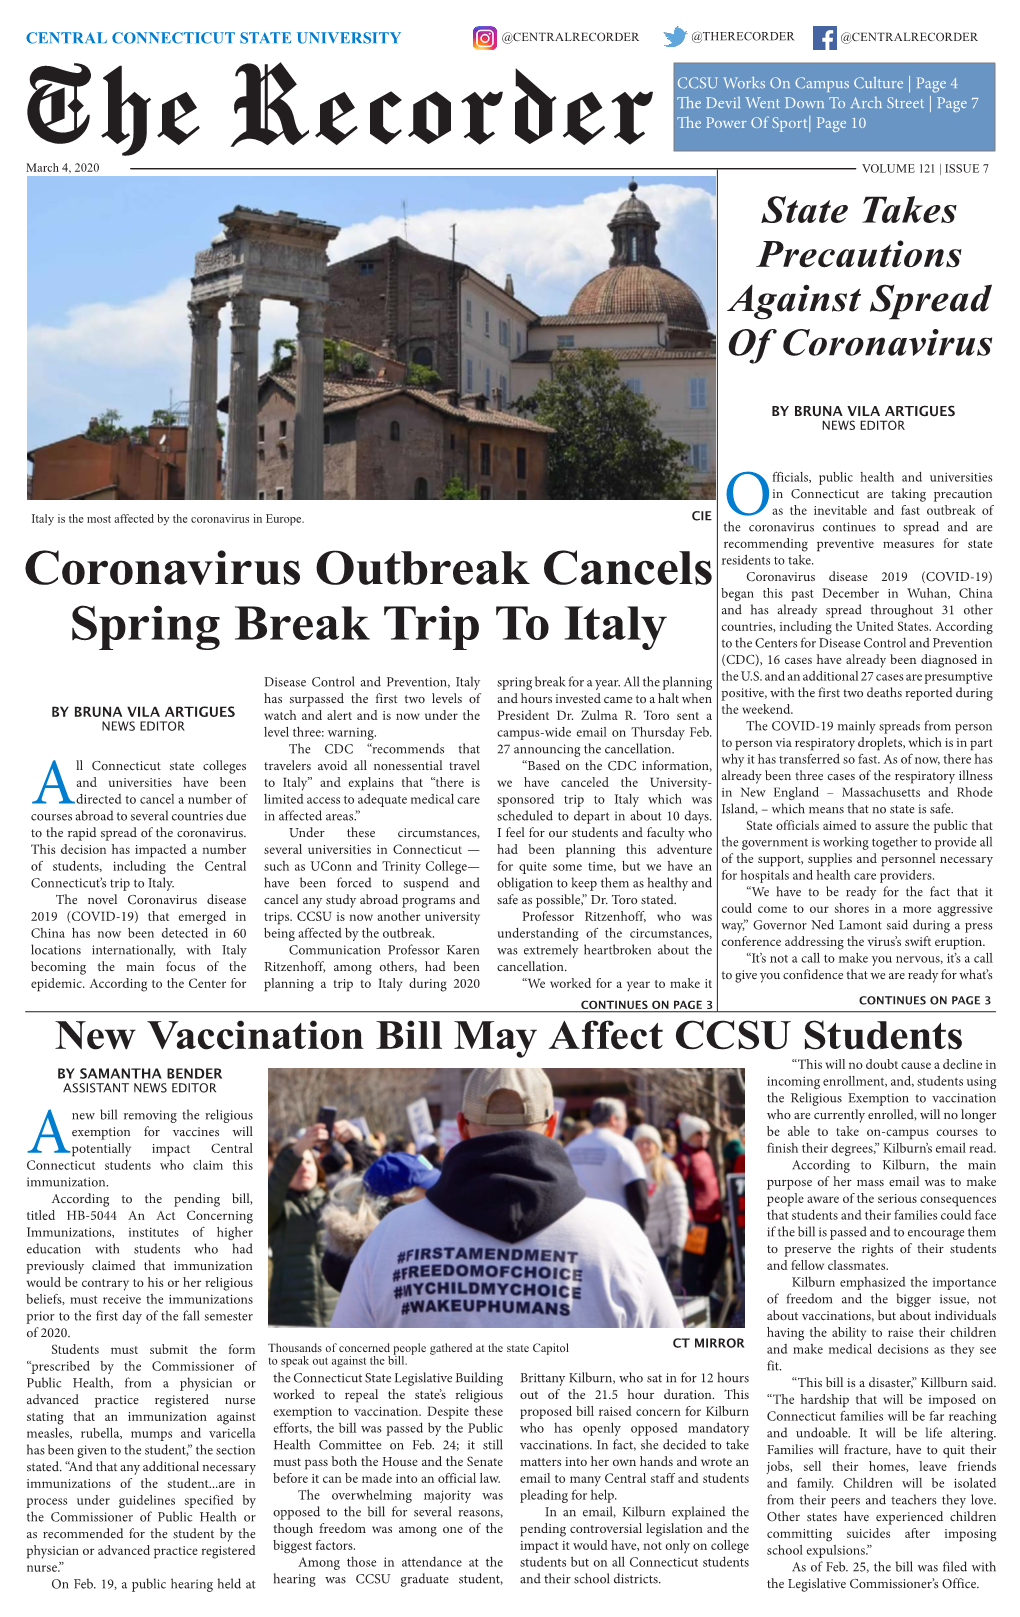 March 4, 2020 Recorder VOLUME 121 | ISSUE 7 State Takes Precautions Against Spread of Coronavirus